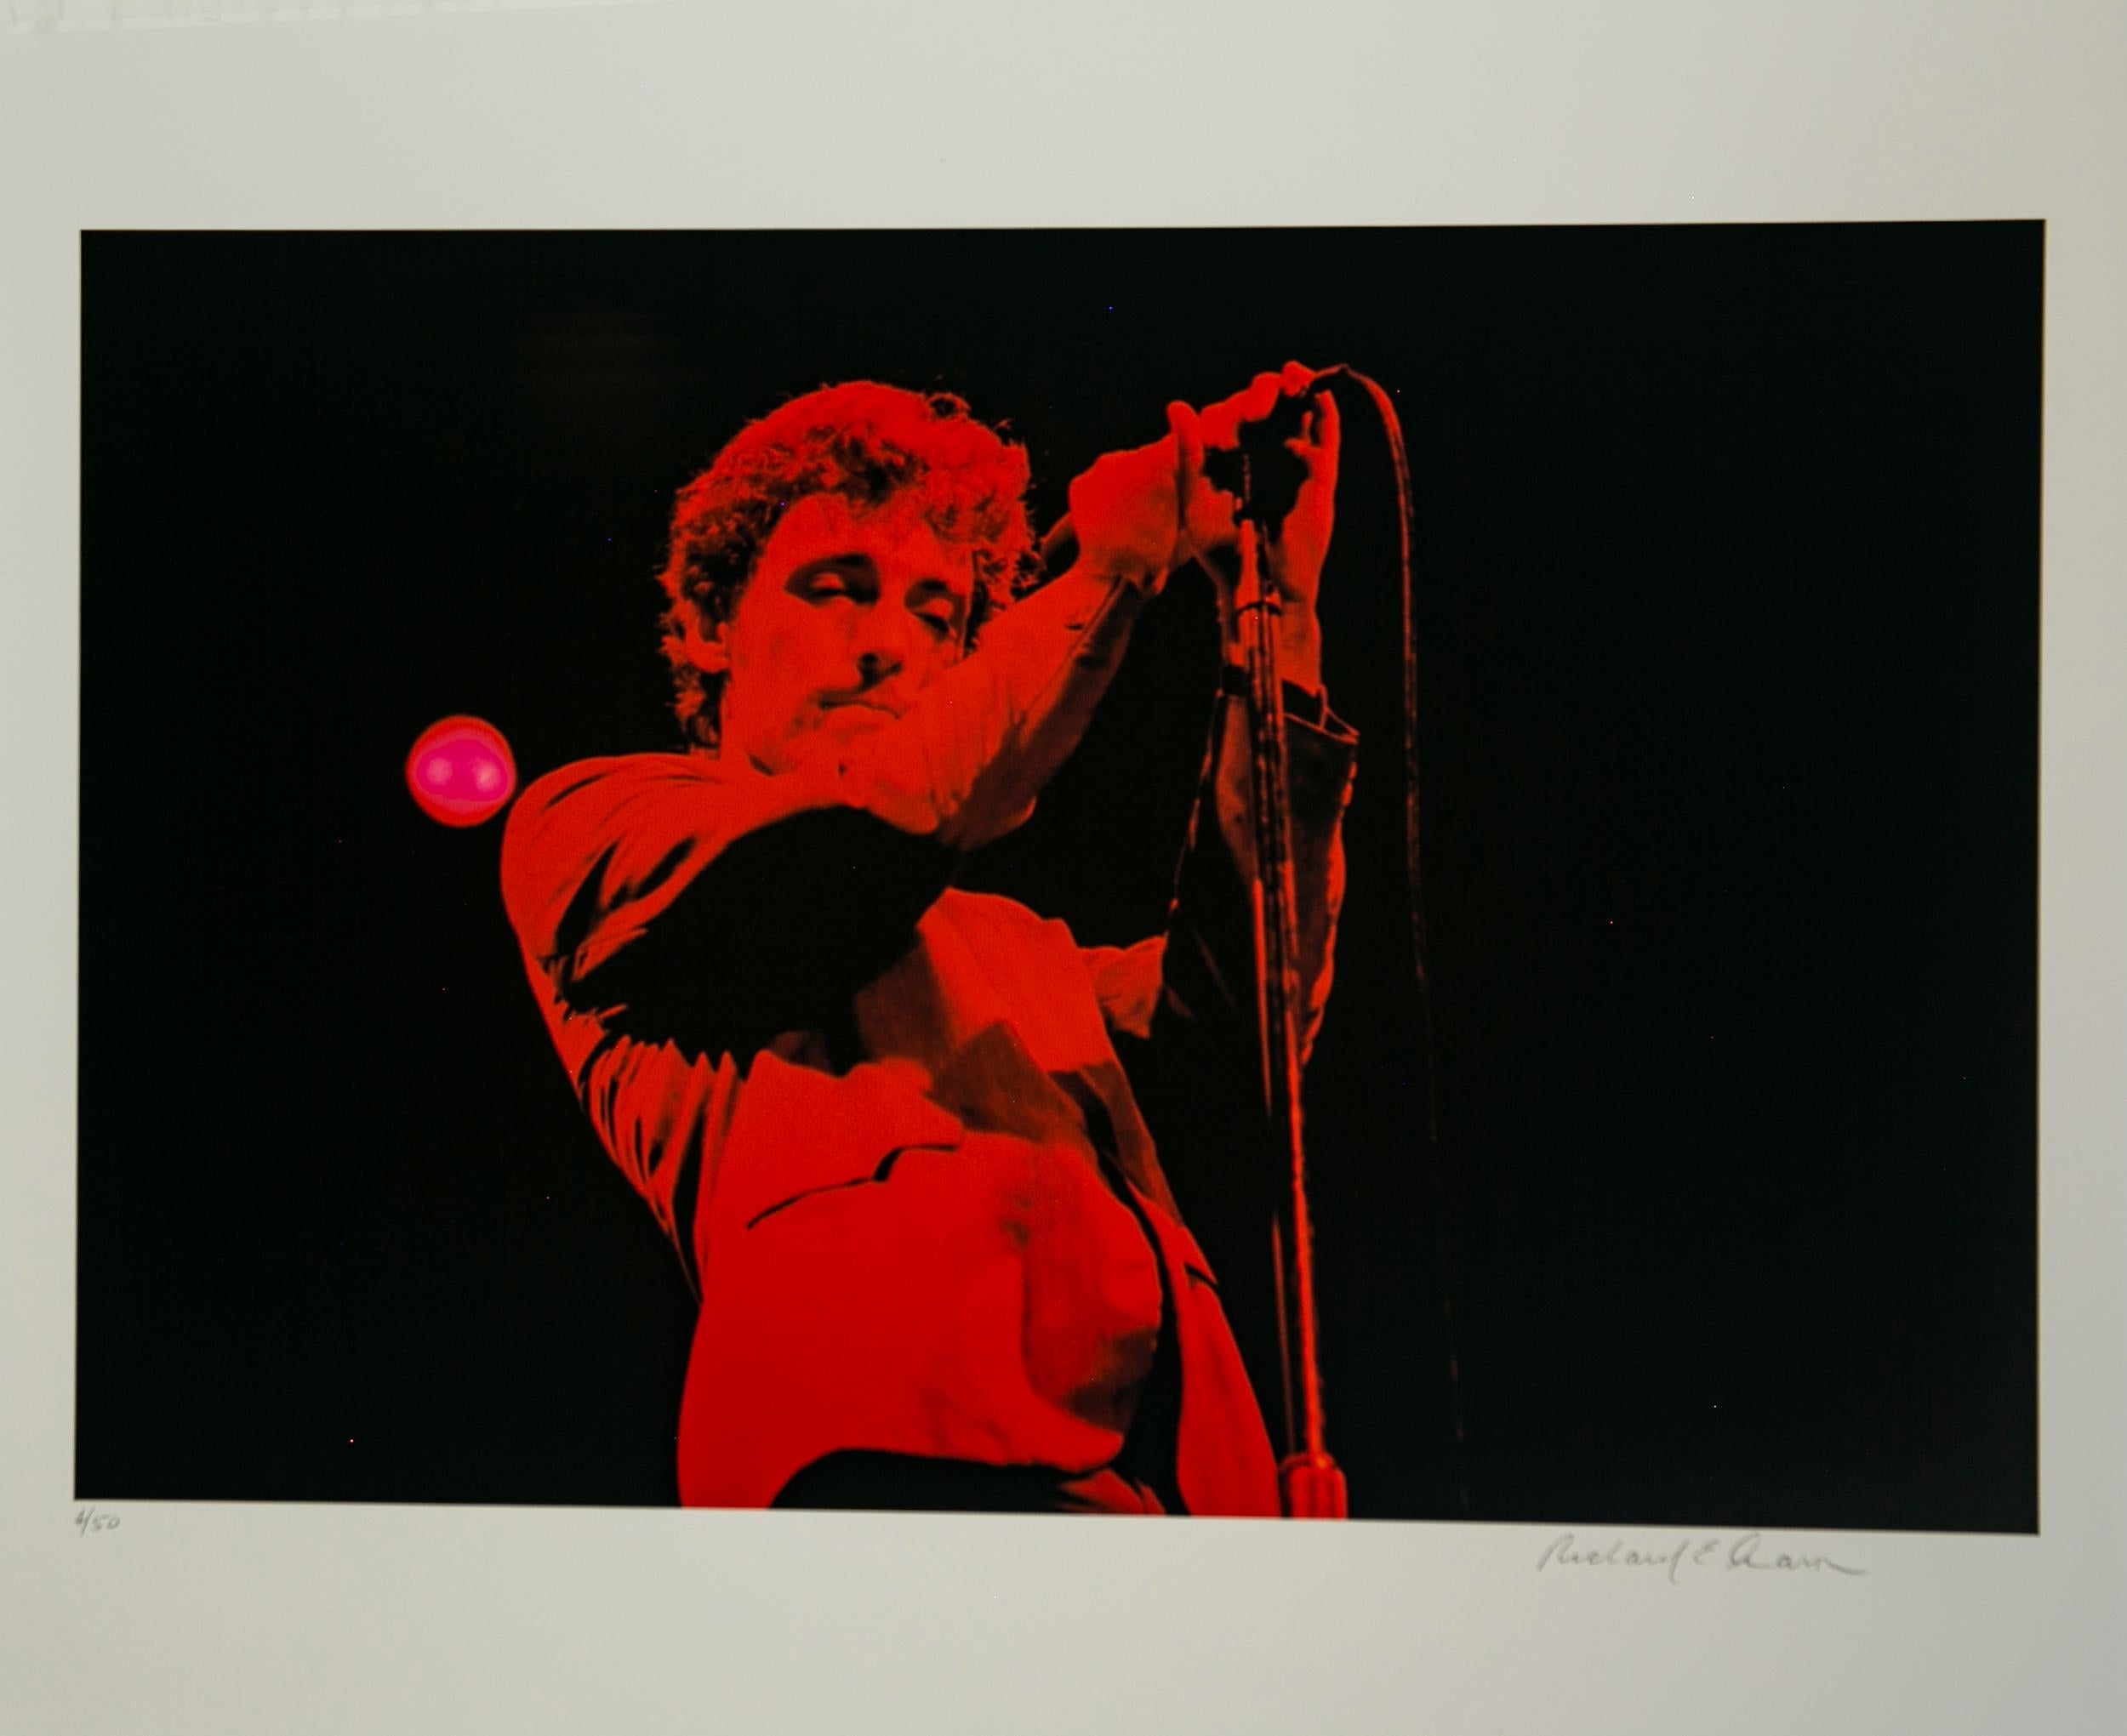 Richard E. Aaron Color Photograph - Springsteen in Red on Hahnemuehle Paper